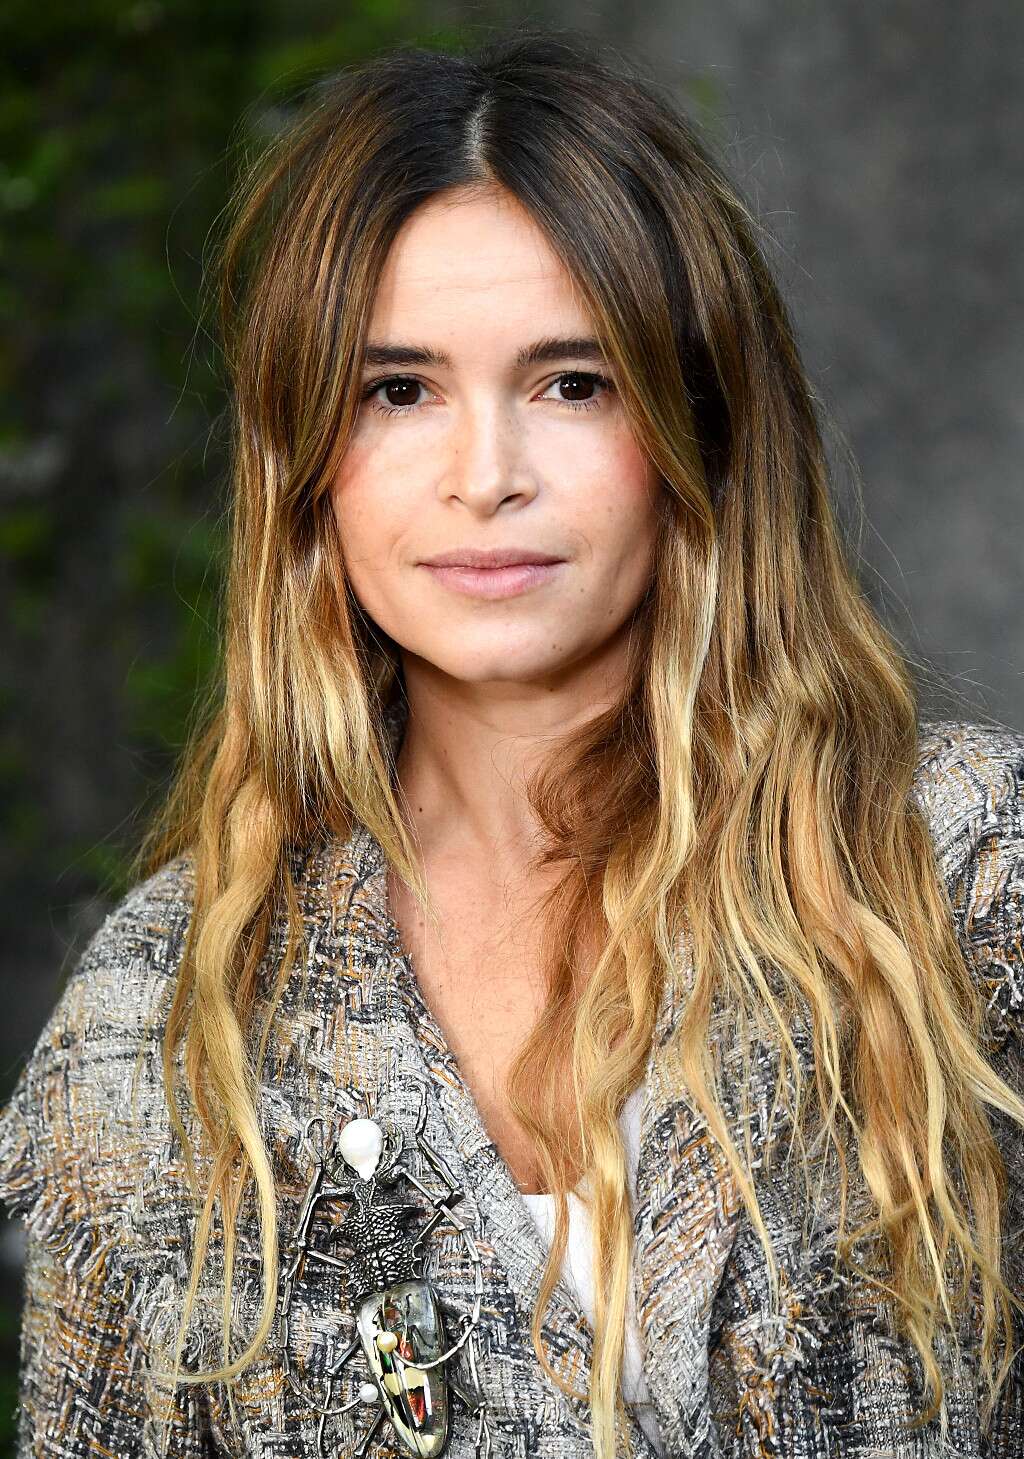 Influencer Miroslava Duma Was “Given 7 Months to Live” After Rare Lung Disease Diagnosis